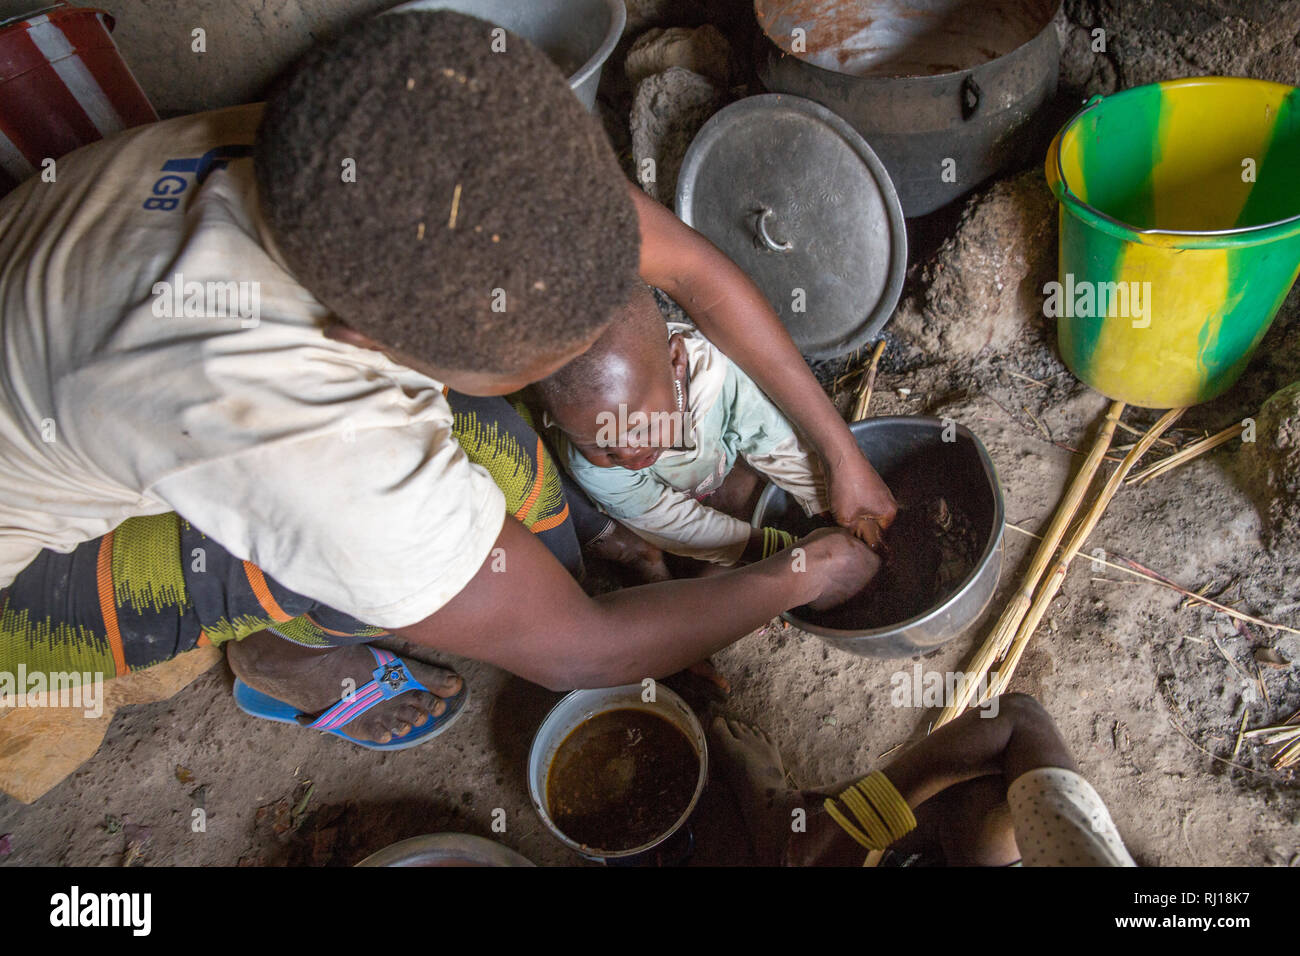 Samba village, Yako Province, Burkina Faso : Collette Guiguemde, 26  washes her baby Ornela' hands before they share the meal she has just cooked. Stock Photo